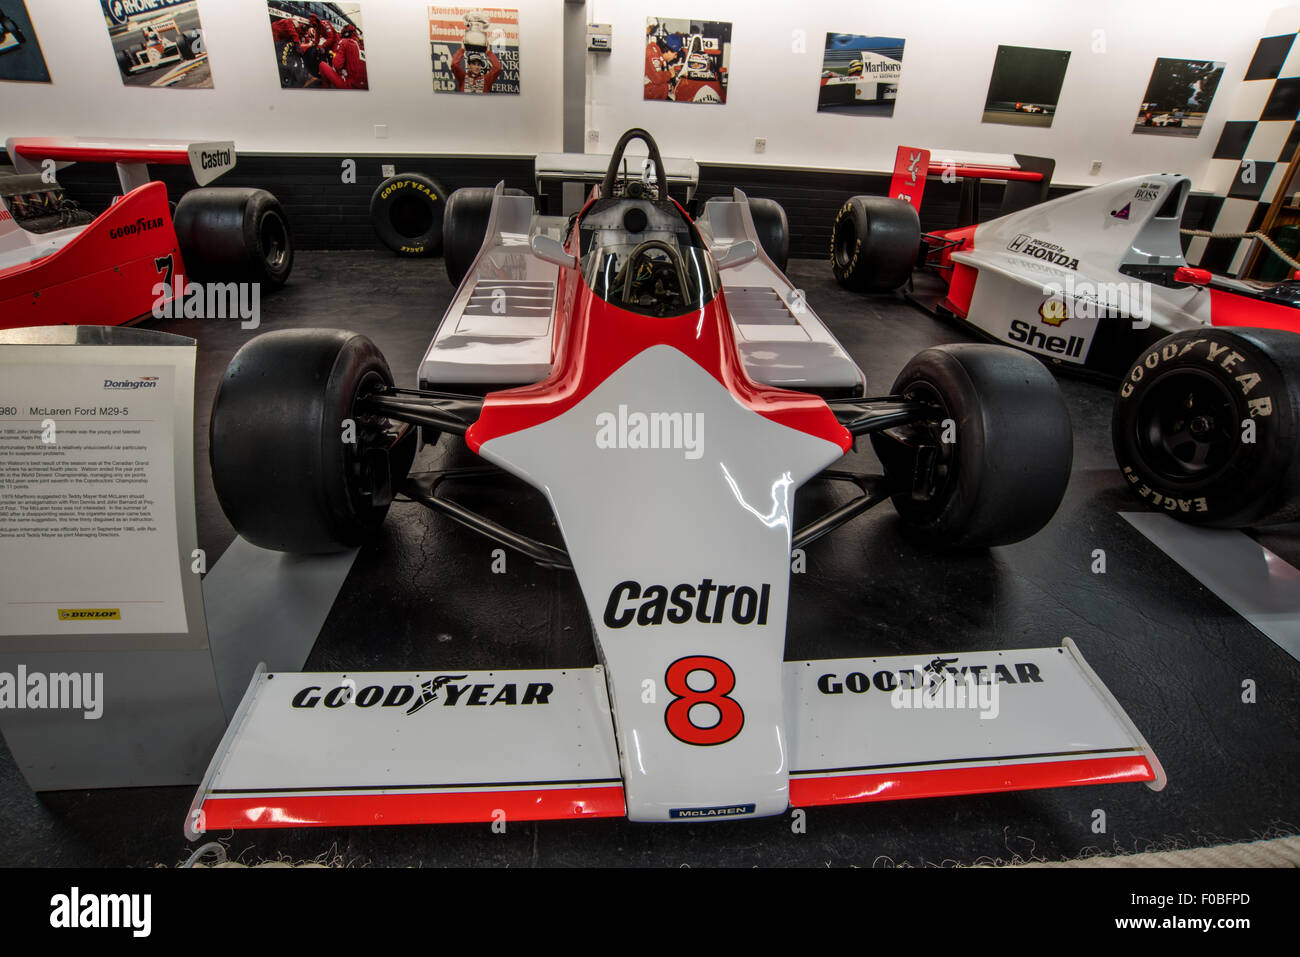 1980 Mclaren Ford M29-5  driven by Alain Prost on display at  the Museum of Donington Raceway Leicestershire, England Stock Photo